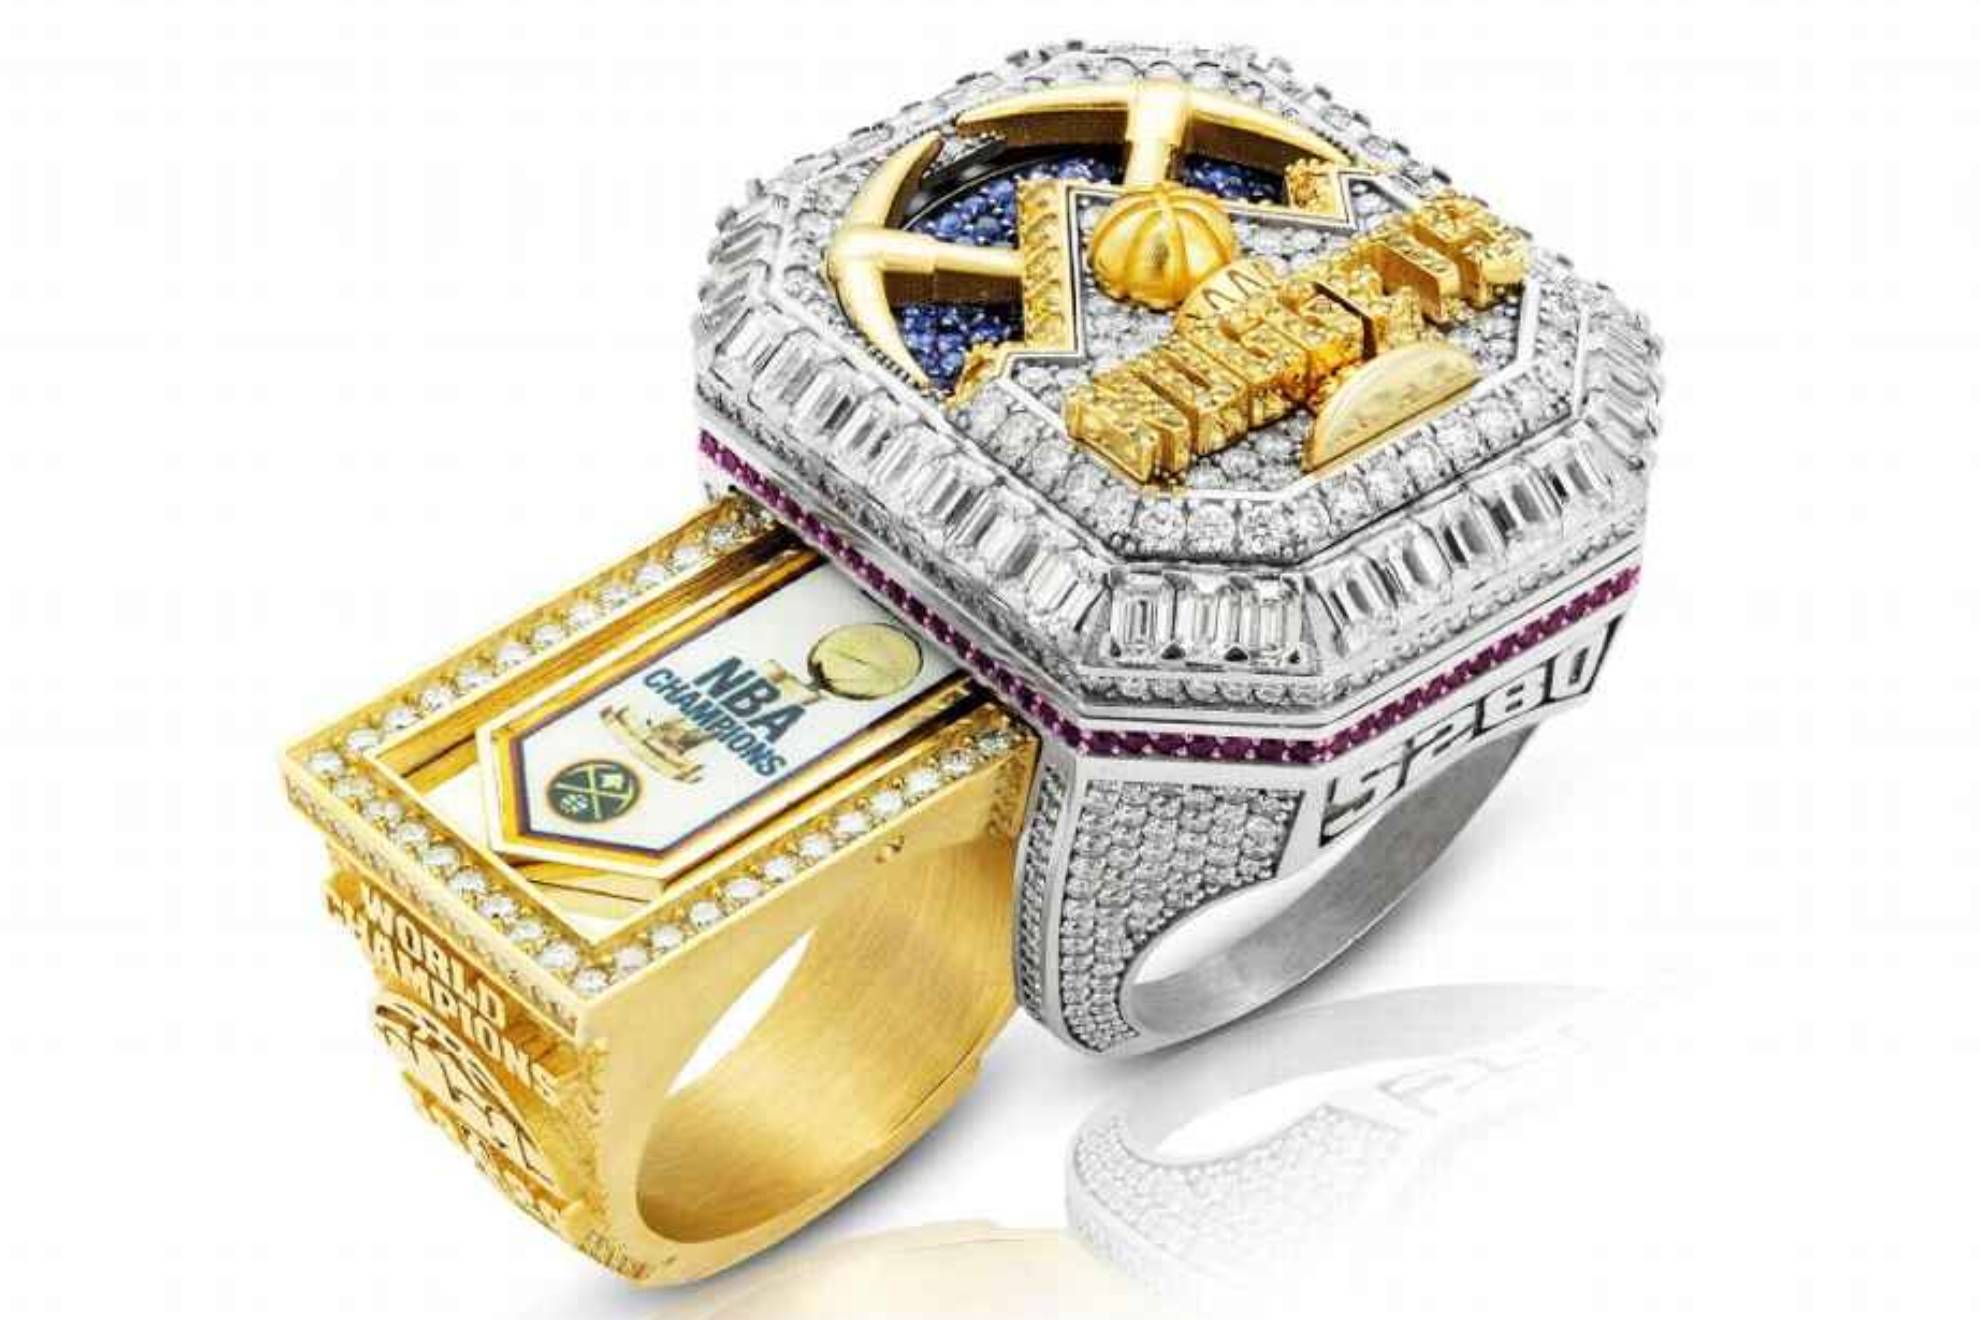 The Denver Nuggets' championship ring